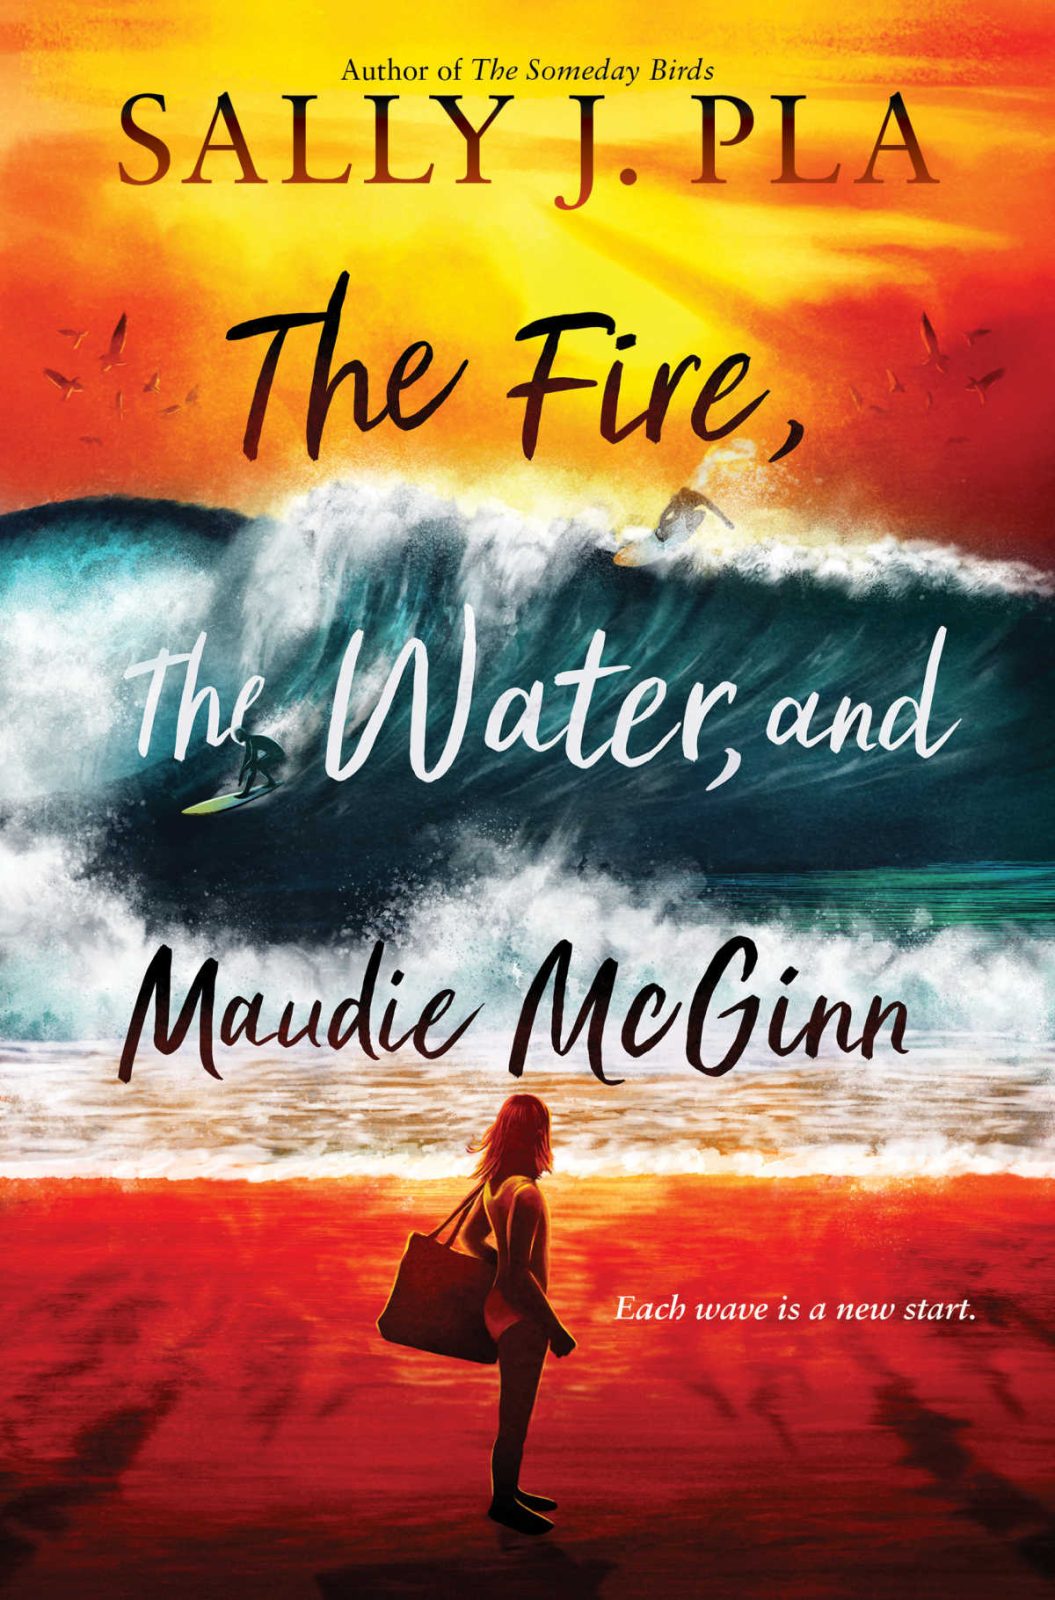 The Fire, The Water & Maudie McGinn is a wonderful coming of age novel that middle grade kids will find easy to relate to.